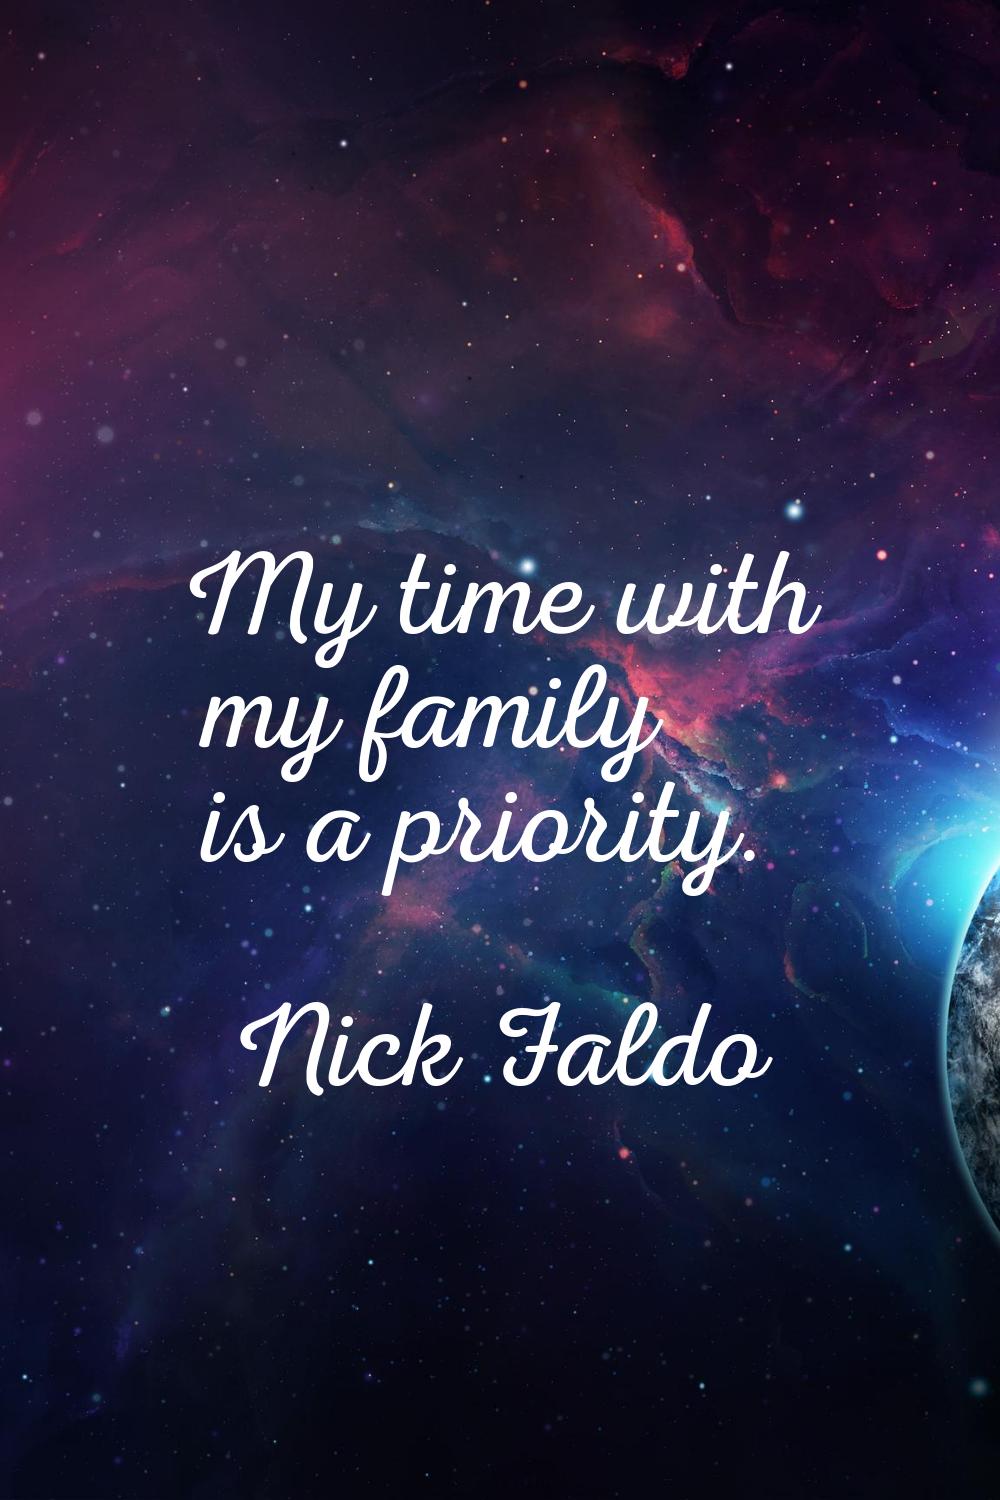 My time with my family is a priority.